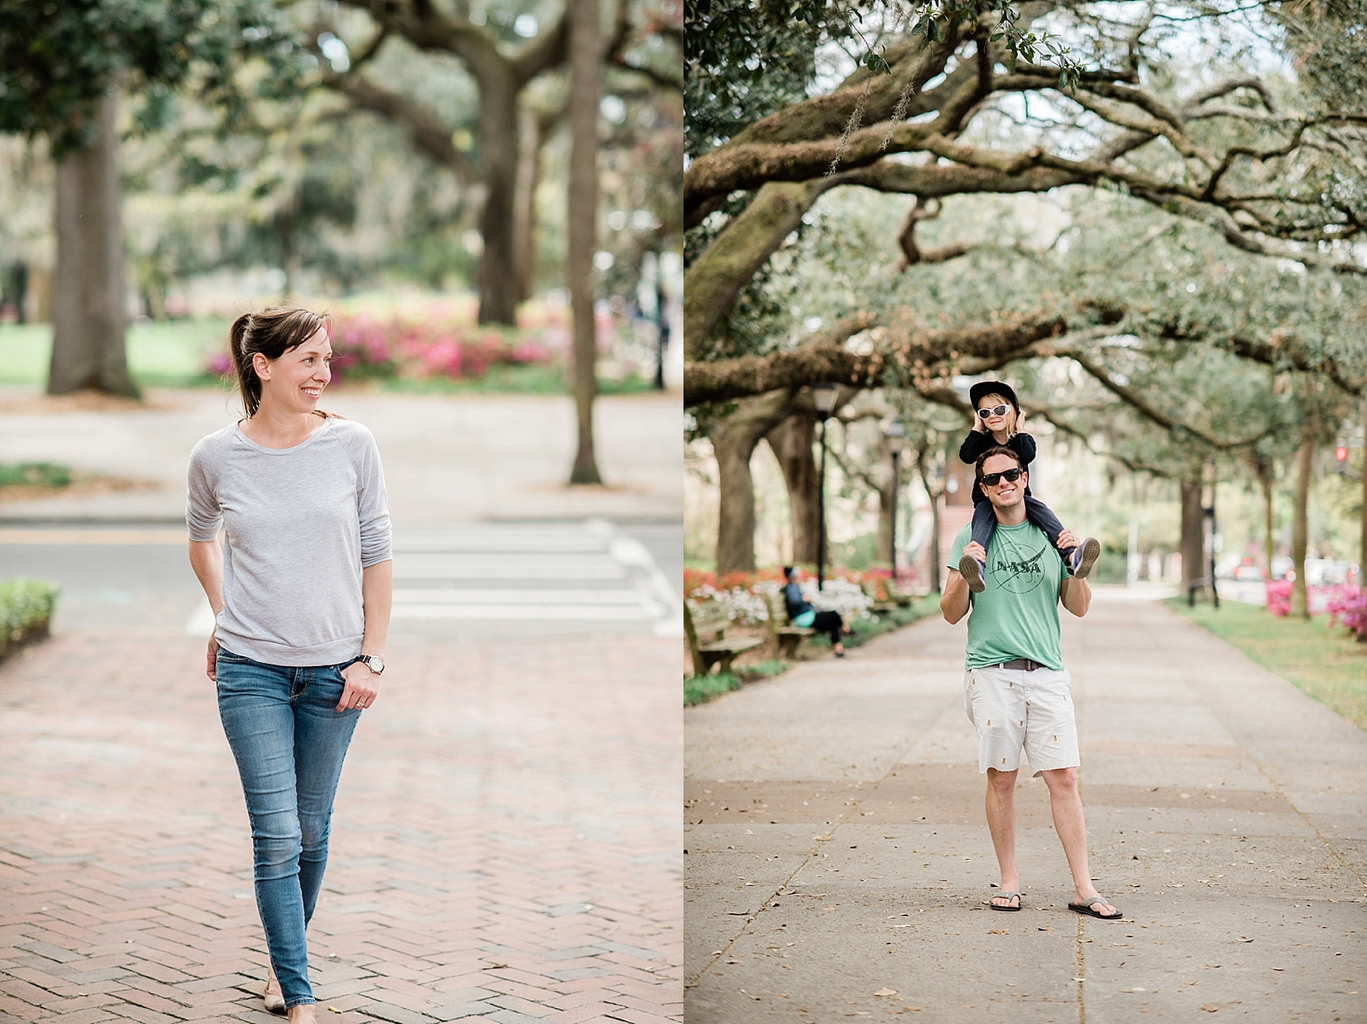 allie_siarto_photography_vacation_photos_savannah_walking_tour_with_young_kids__0022.jpg